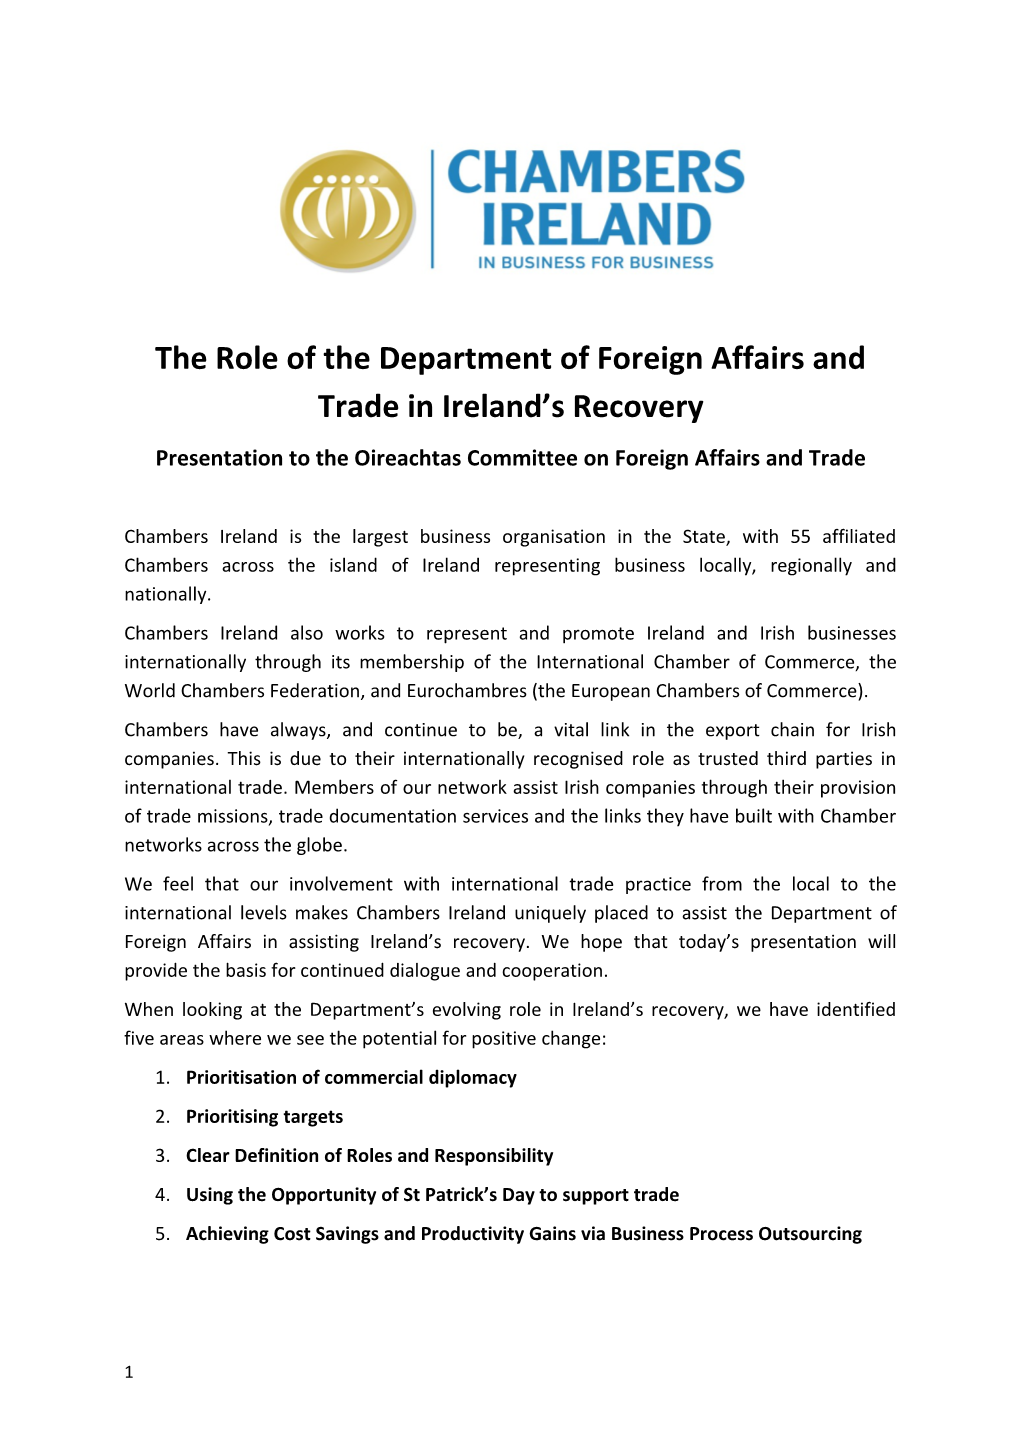 The Role of the Department of Foreign Affairs and Trade in Ireland S Recovery